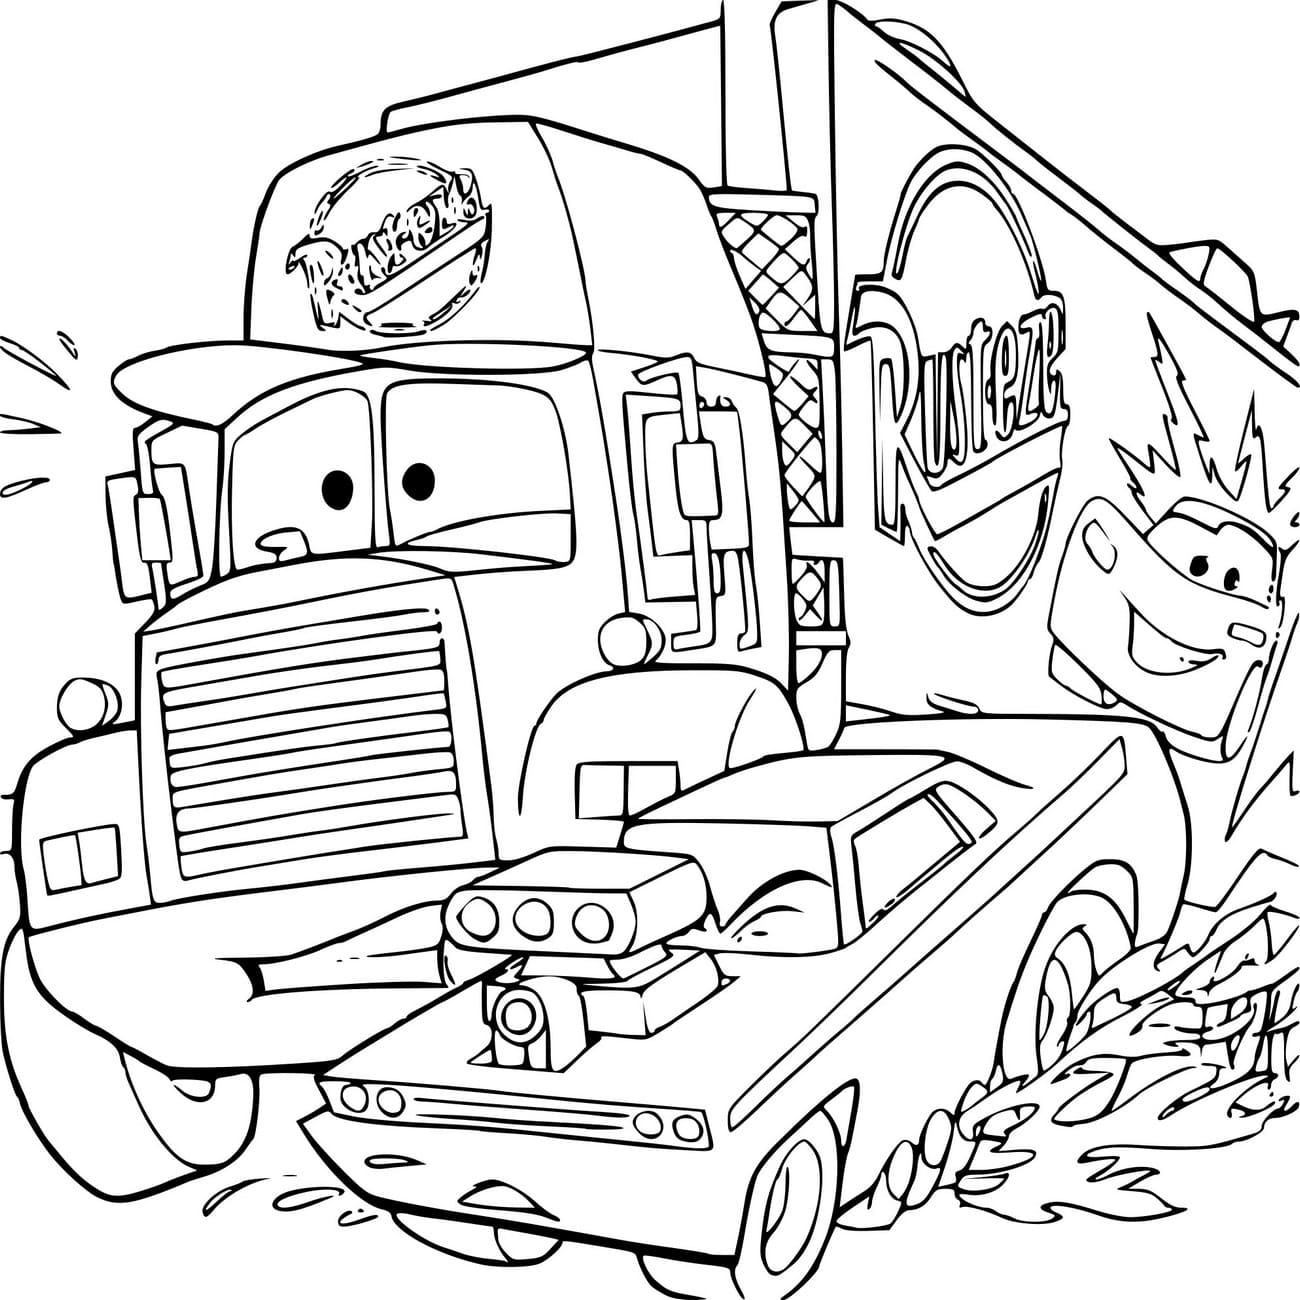 Lightning Mcqueen coloring pages Free coloring pages